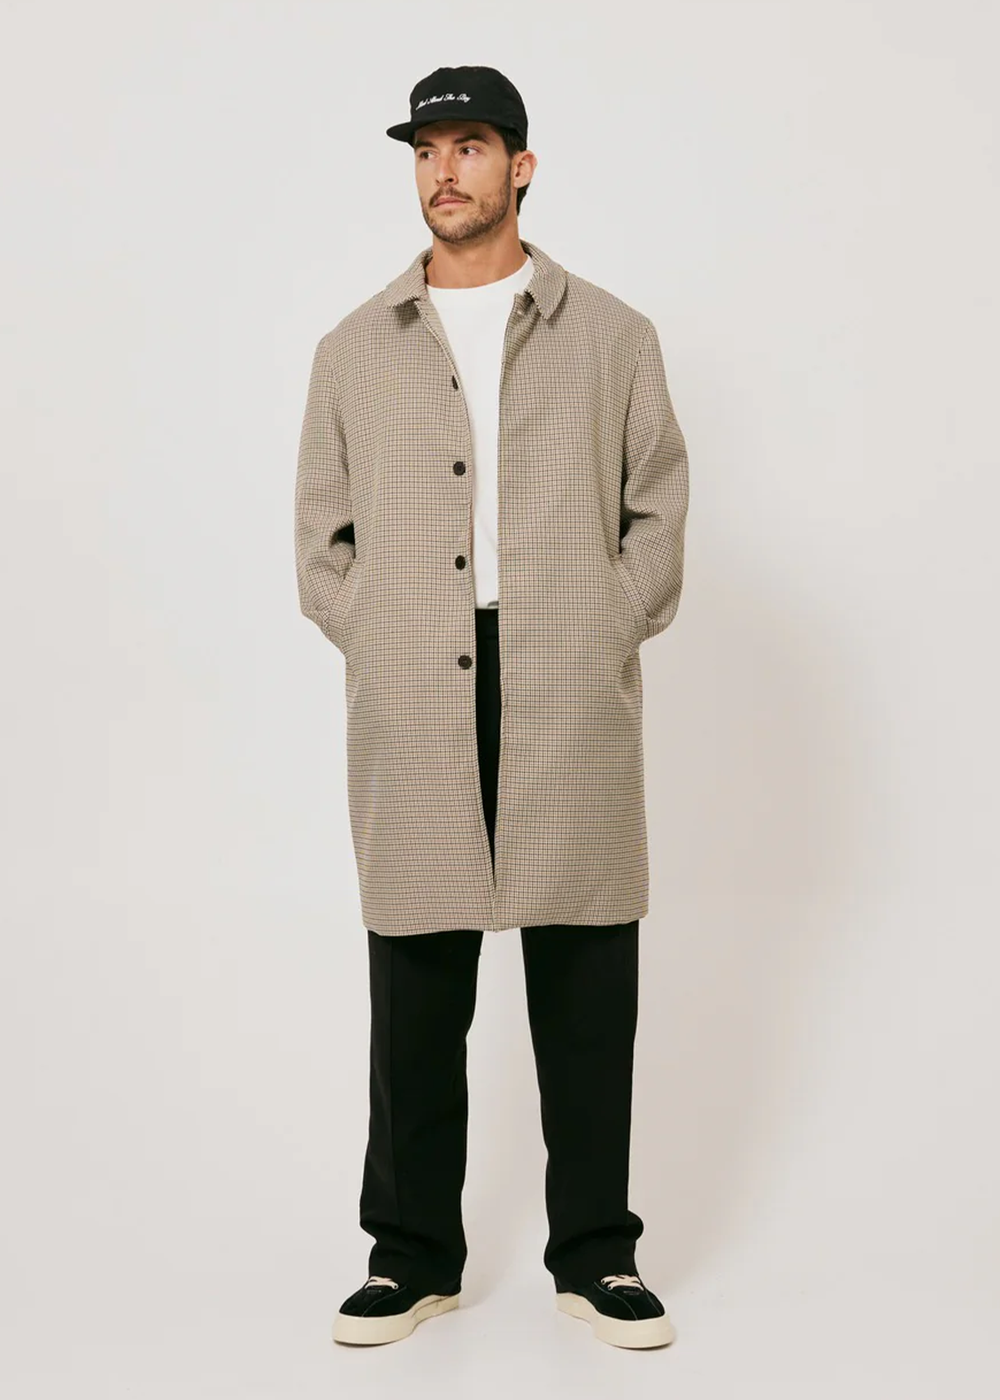 Porter James Sports Mac Coat - Tweed | PORTER JAMES SPORTS | Mad About The Boy